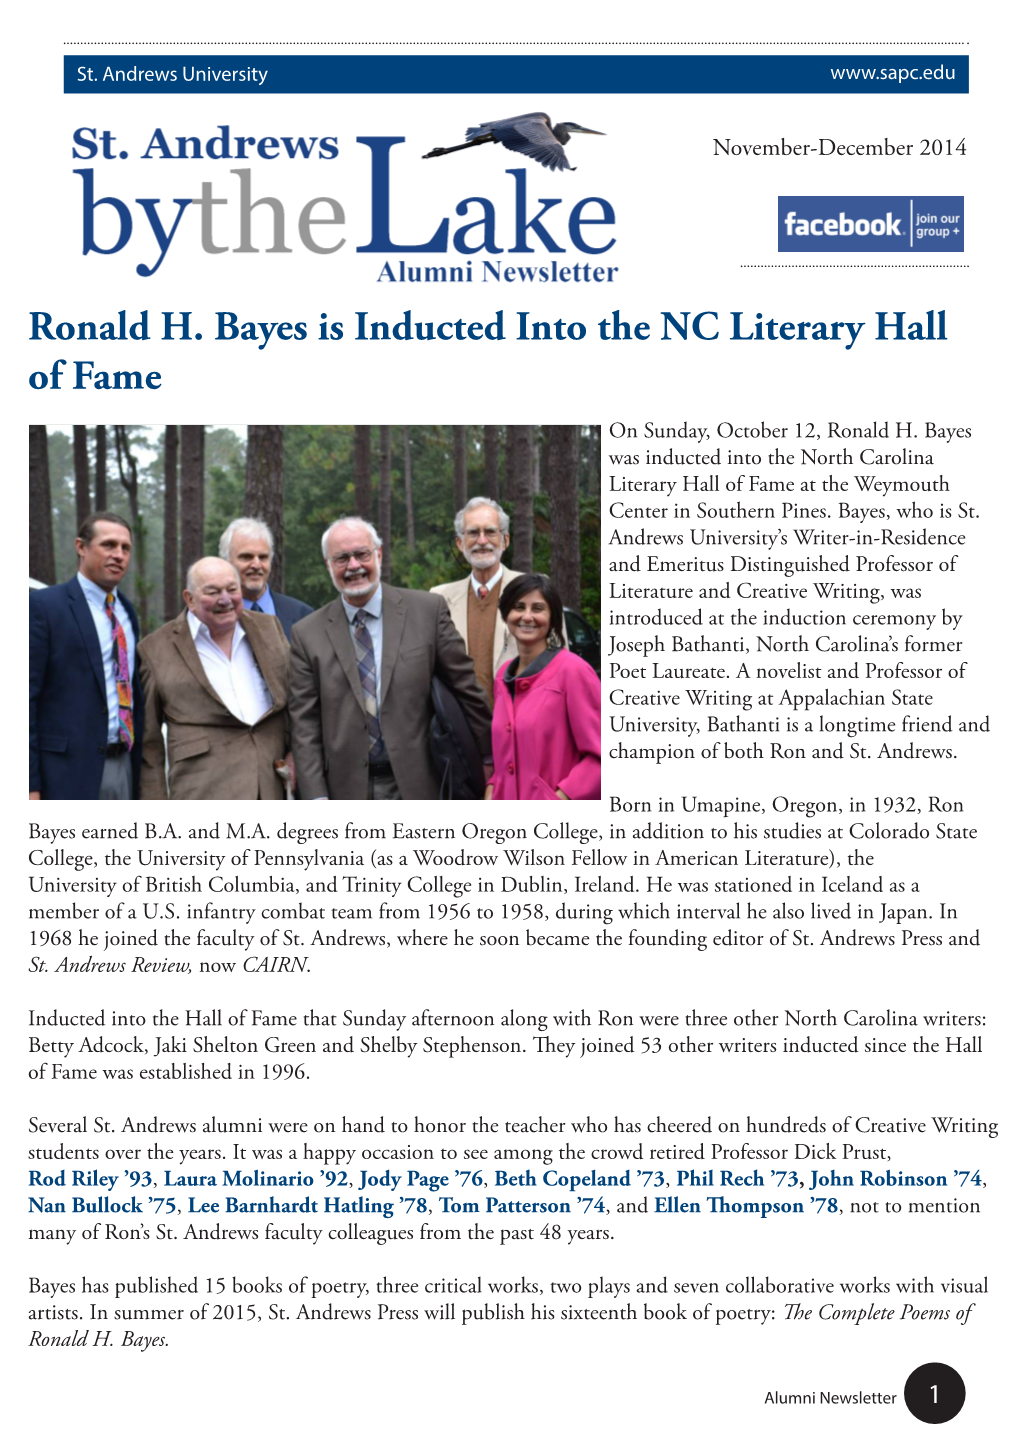 Ronald H. Bayes Is Inducted Into the NC Literary Hall of Fame on Sunday, October 12, Ronald H